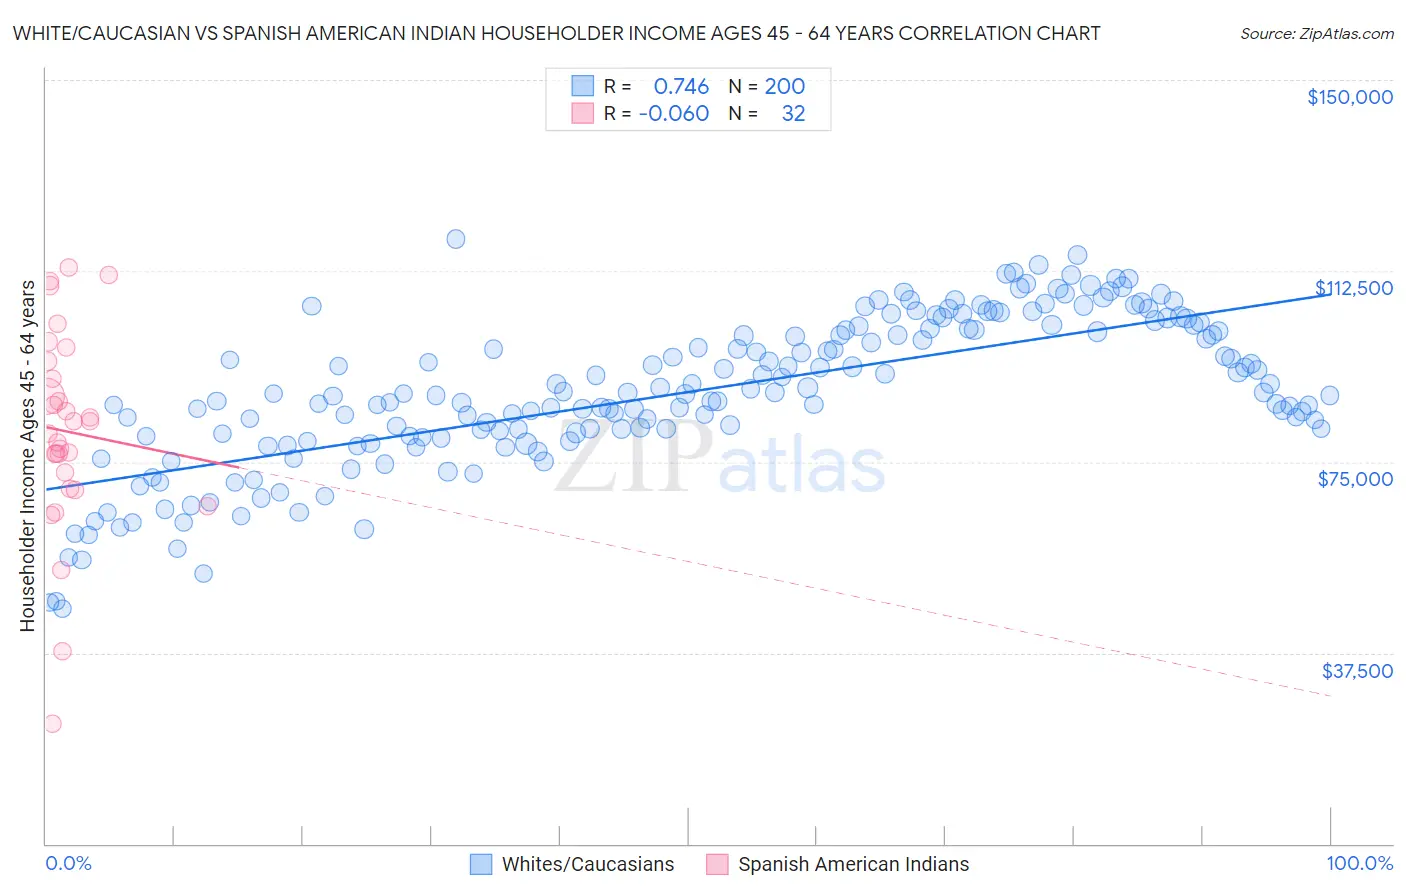 White/Caucasian vs Spanish American Indian Householder Income Ages 45 - 64 years